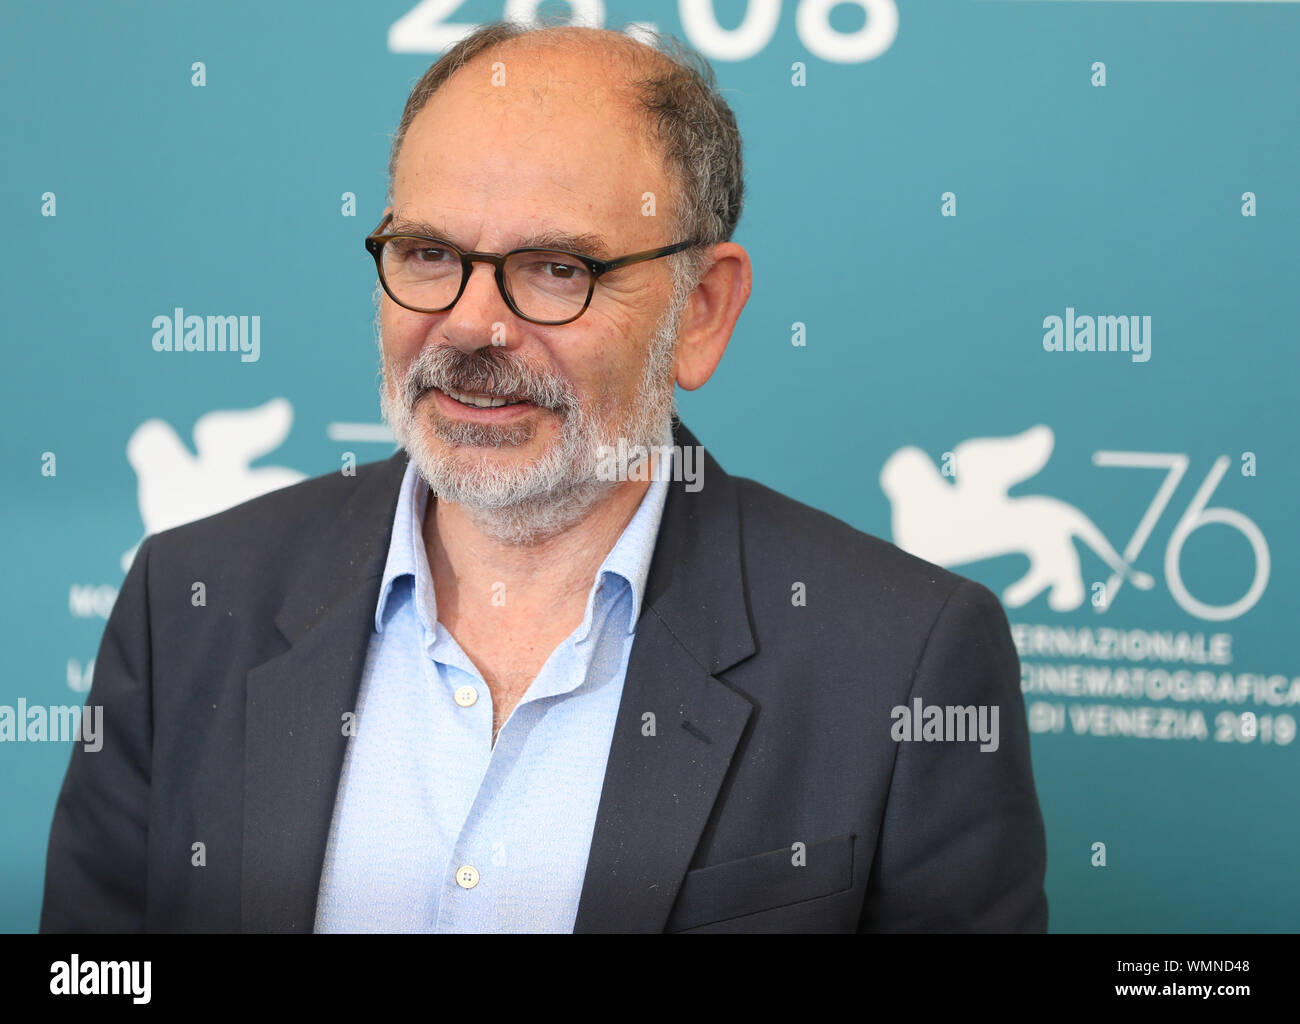 Venice, Italy. 5th Sep, 2019. Actor Jean-Pierre Darroussin attends a photocall for the film 'Gloria Mundi' at the 76th Venice Film Festival in Venice, Italy, Sept. 5, 2019. Credit: Cheng Tingting/Xinhua/Alamy Live News Stock Photo